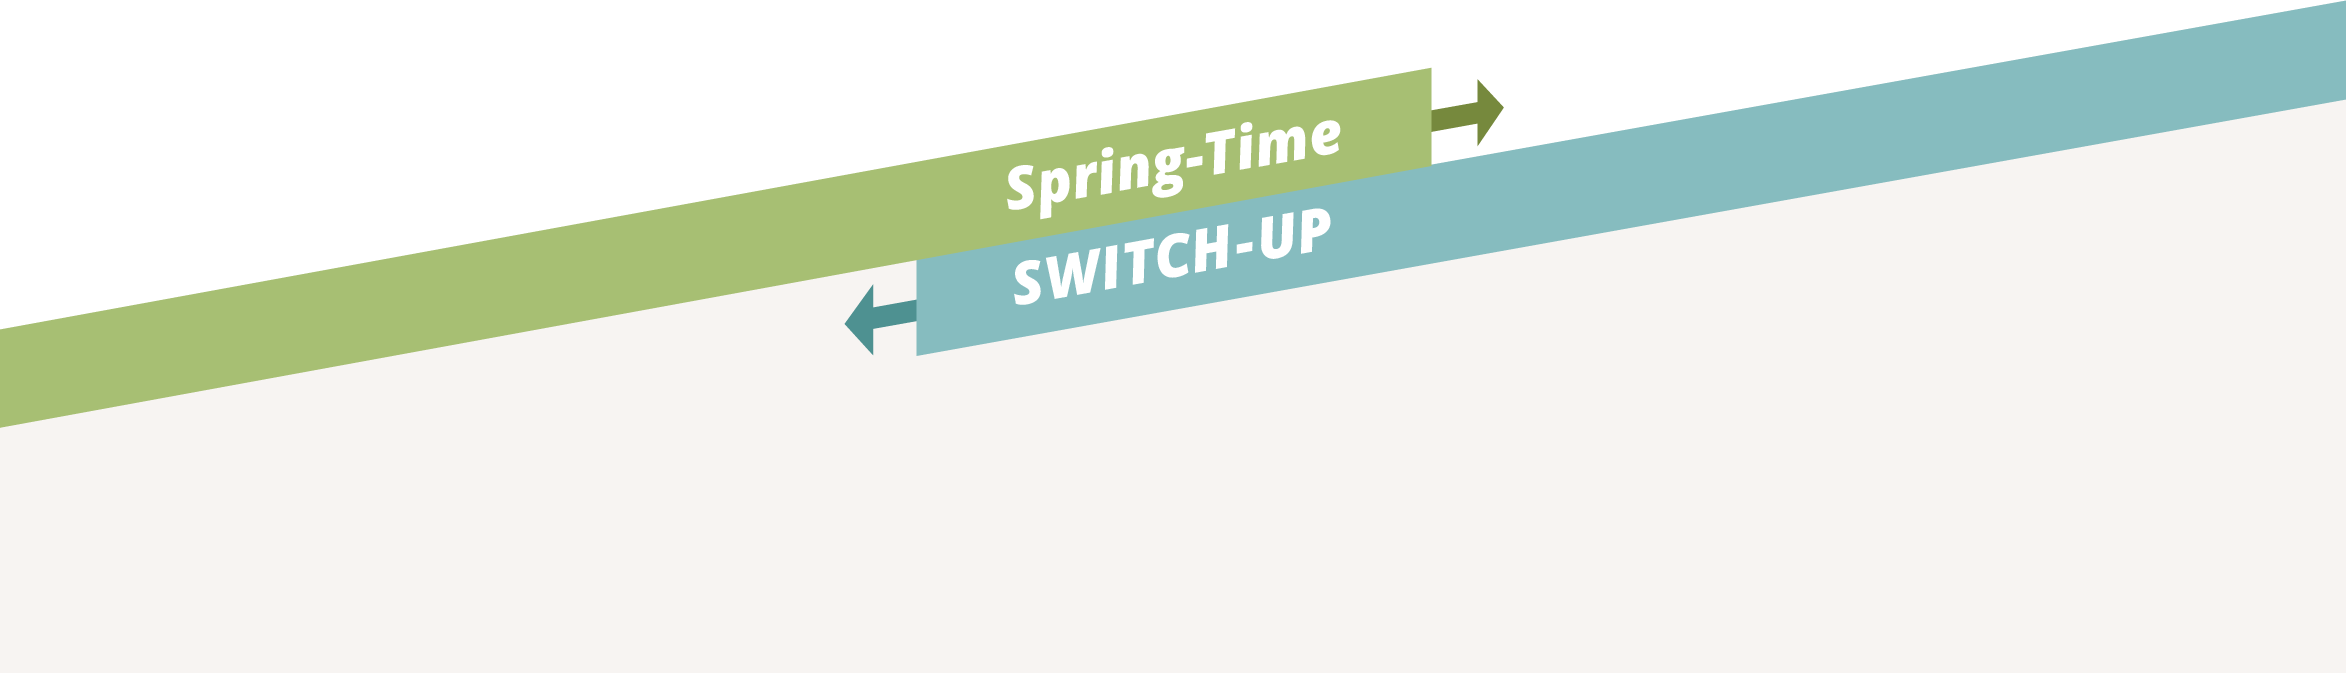 Nonn's Spring-Time Switch-Up